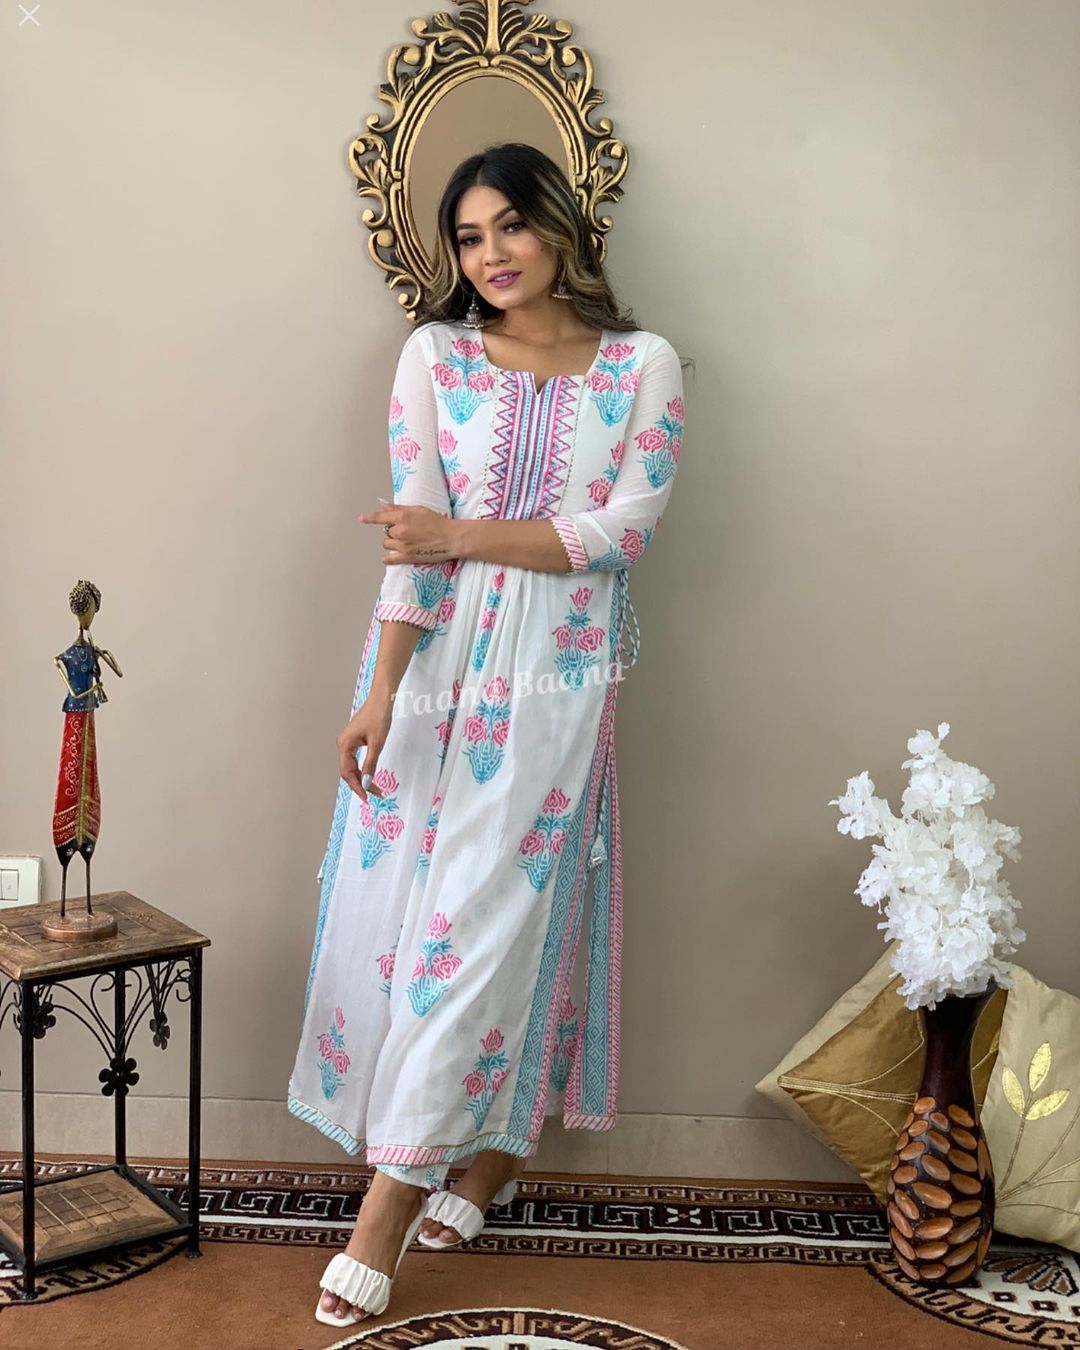 Long Kurtis Can Be Statement Pieces If You Know How to Style Them Properly!  10 Amazing Long Kurti Designs and How to Style Them in Different Ways (2020)